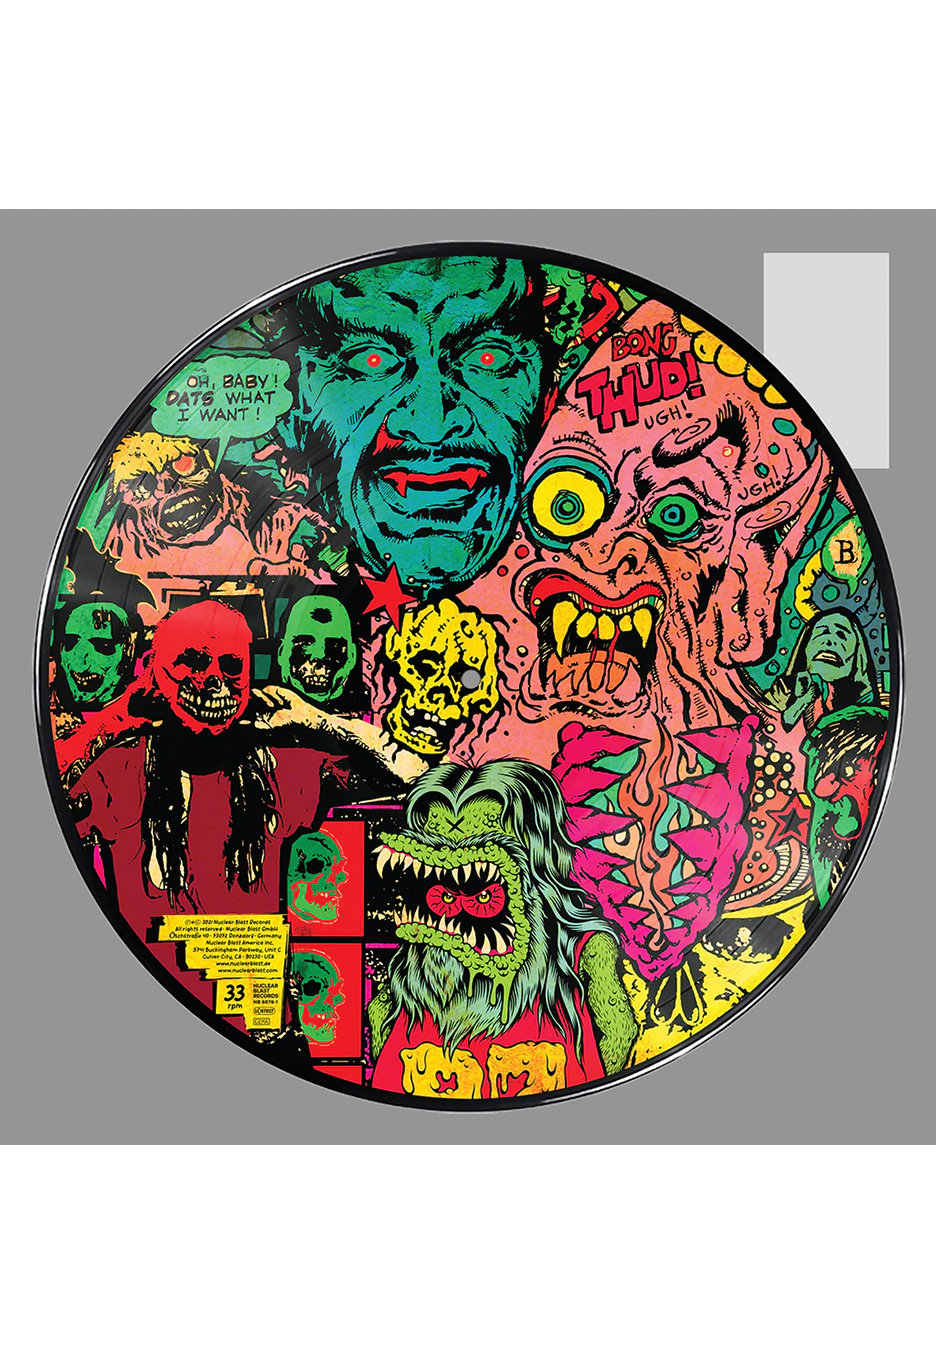 Rob Zombie - The Lunar Injection Kool Aid Eclipse Conspiracy - Picture Vinyl